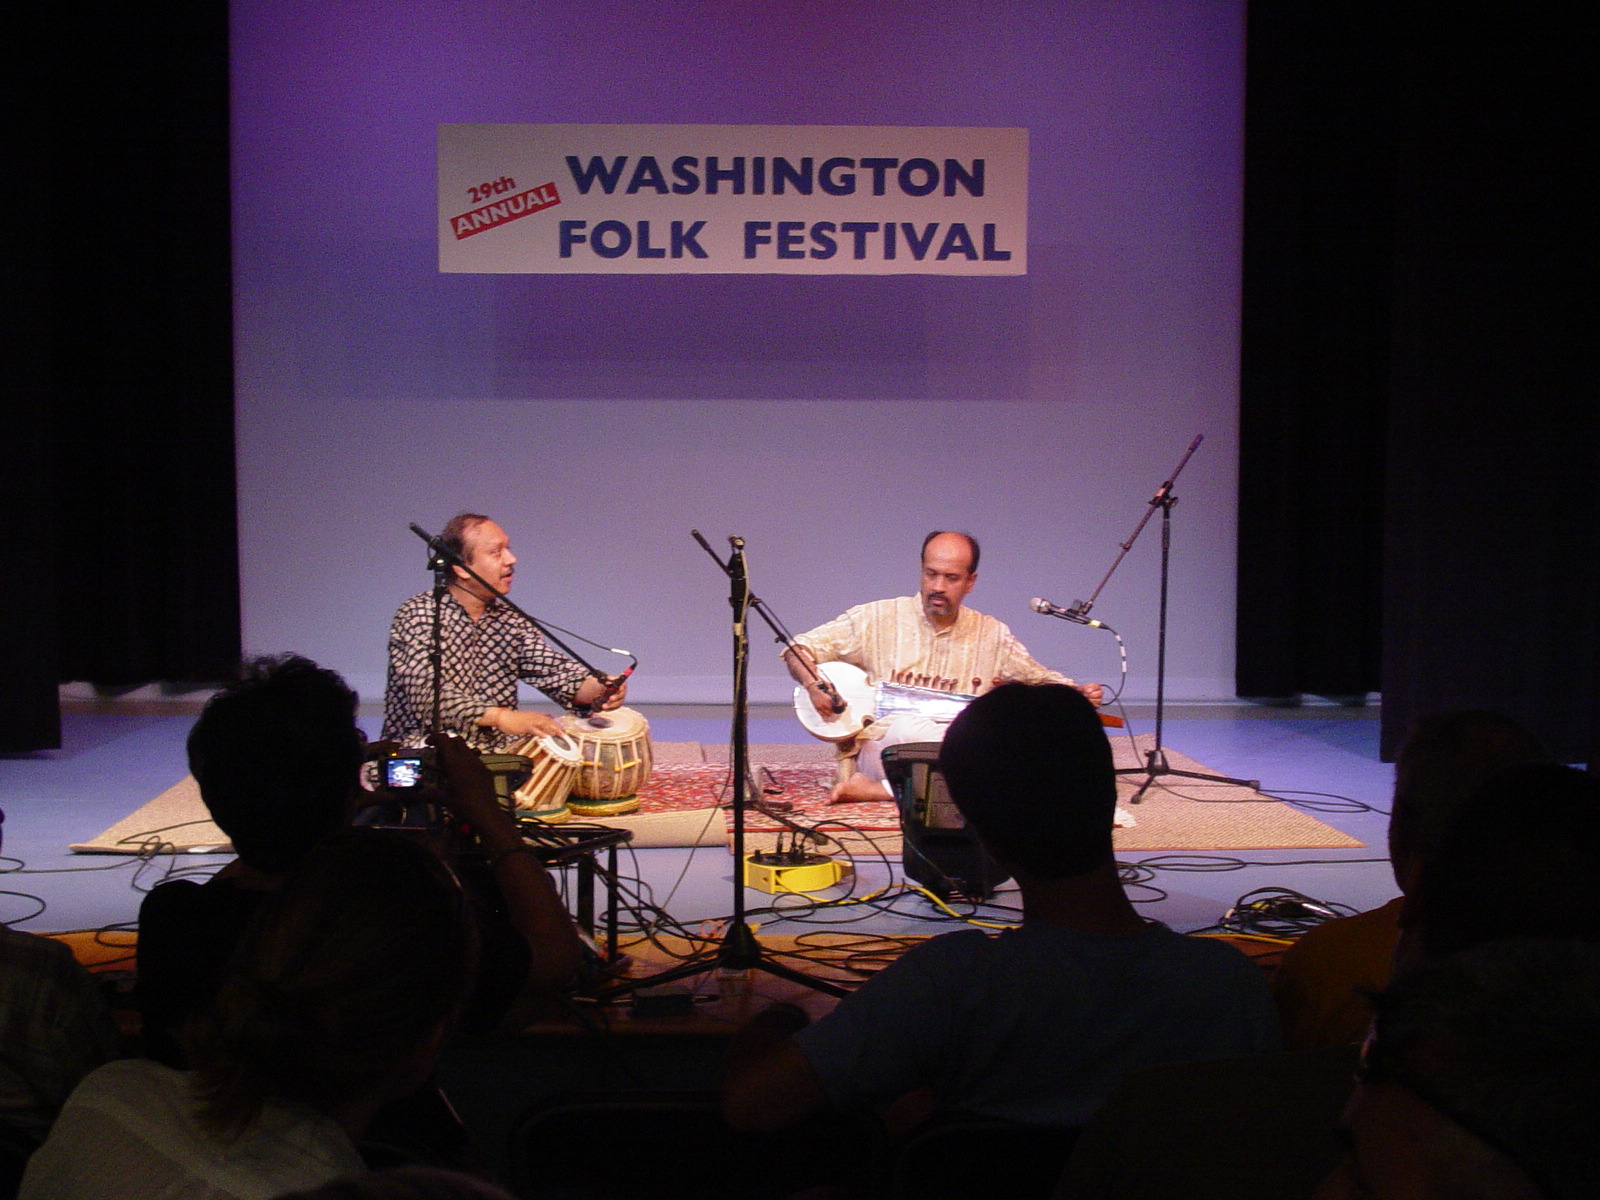 Two men sitting on stage playing instruments and singing.